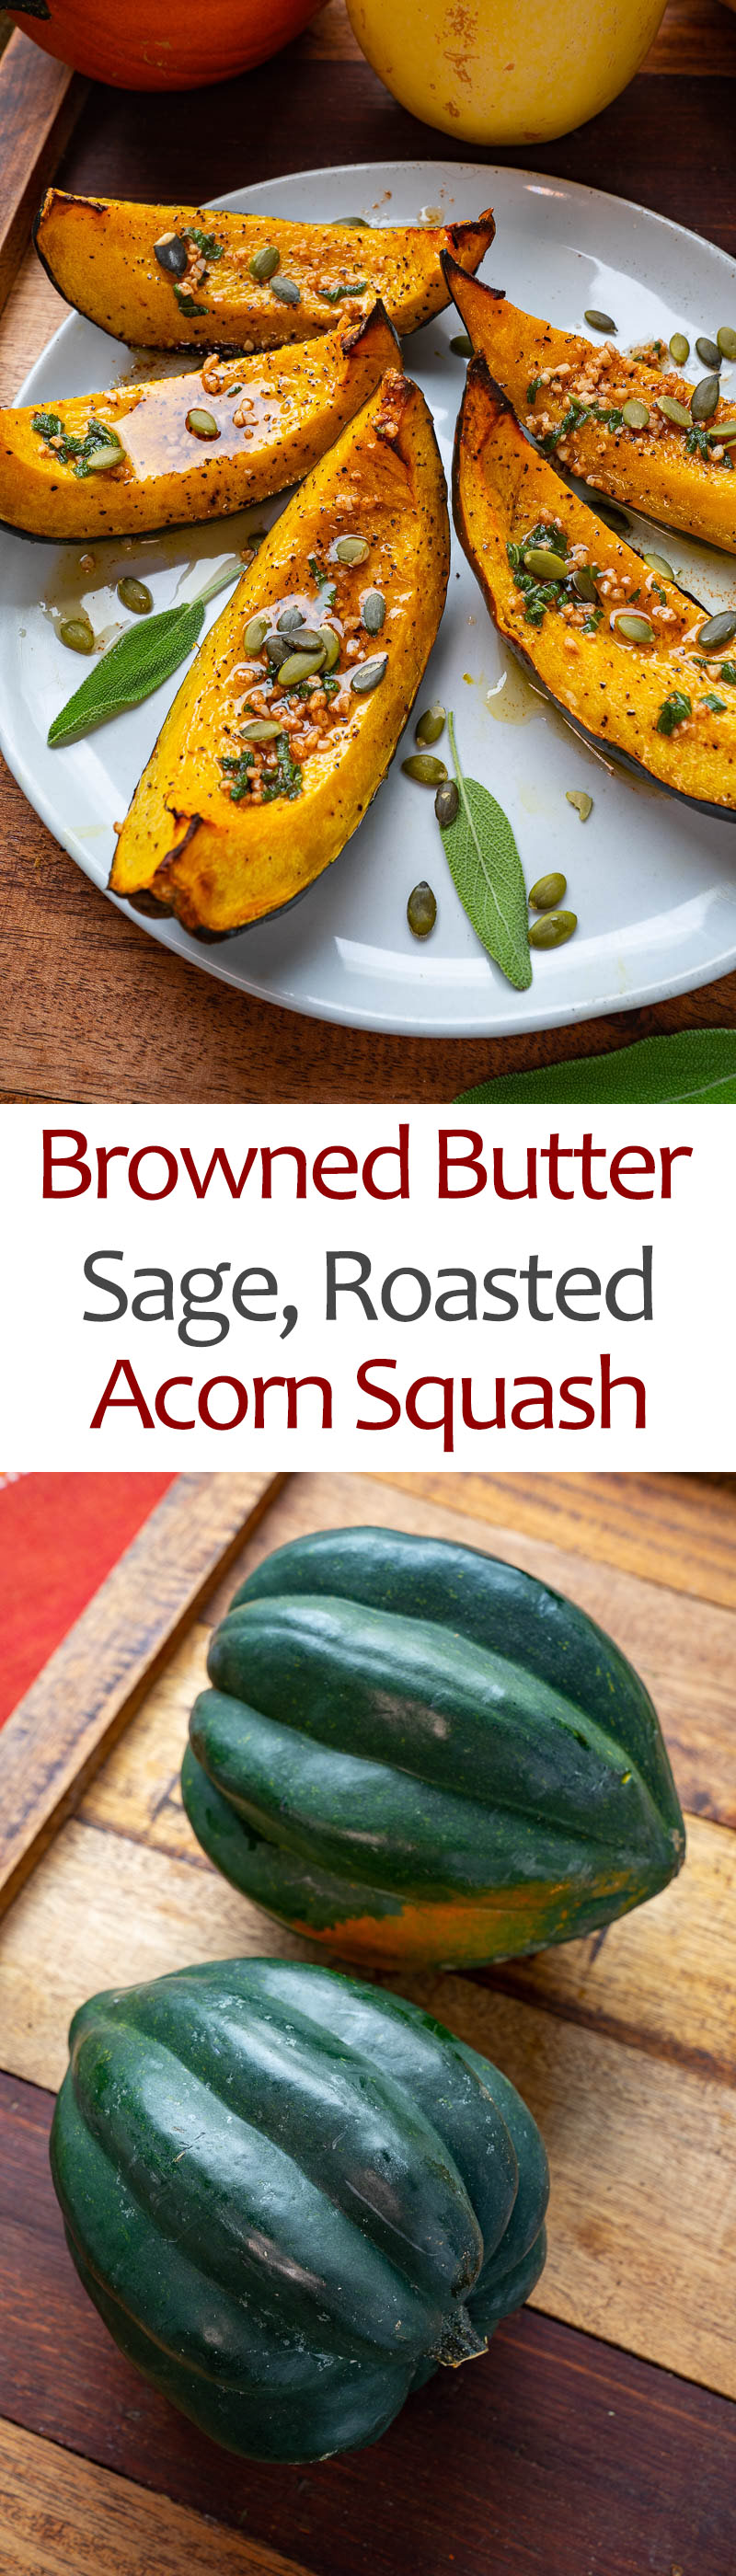 Browned Butter and Sage Roasted Acorn Squash